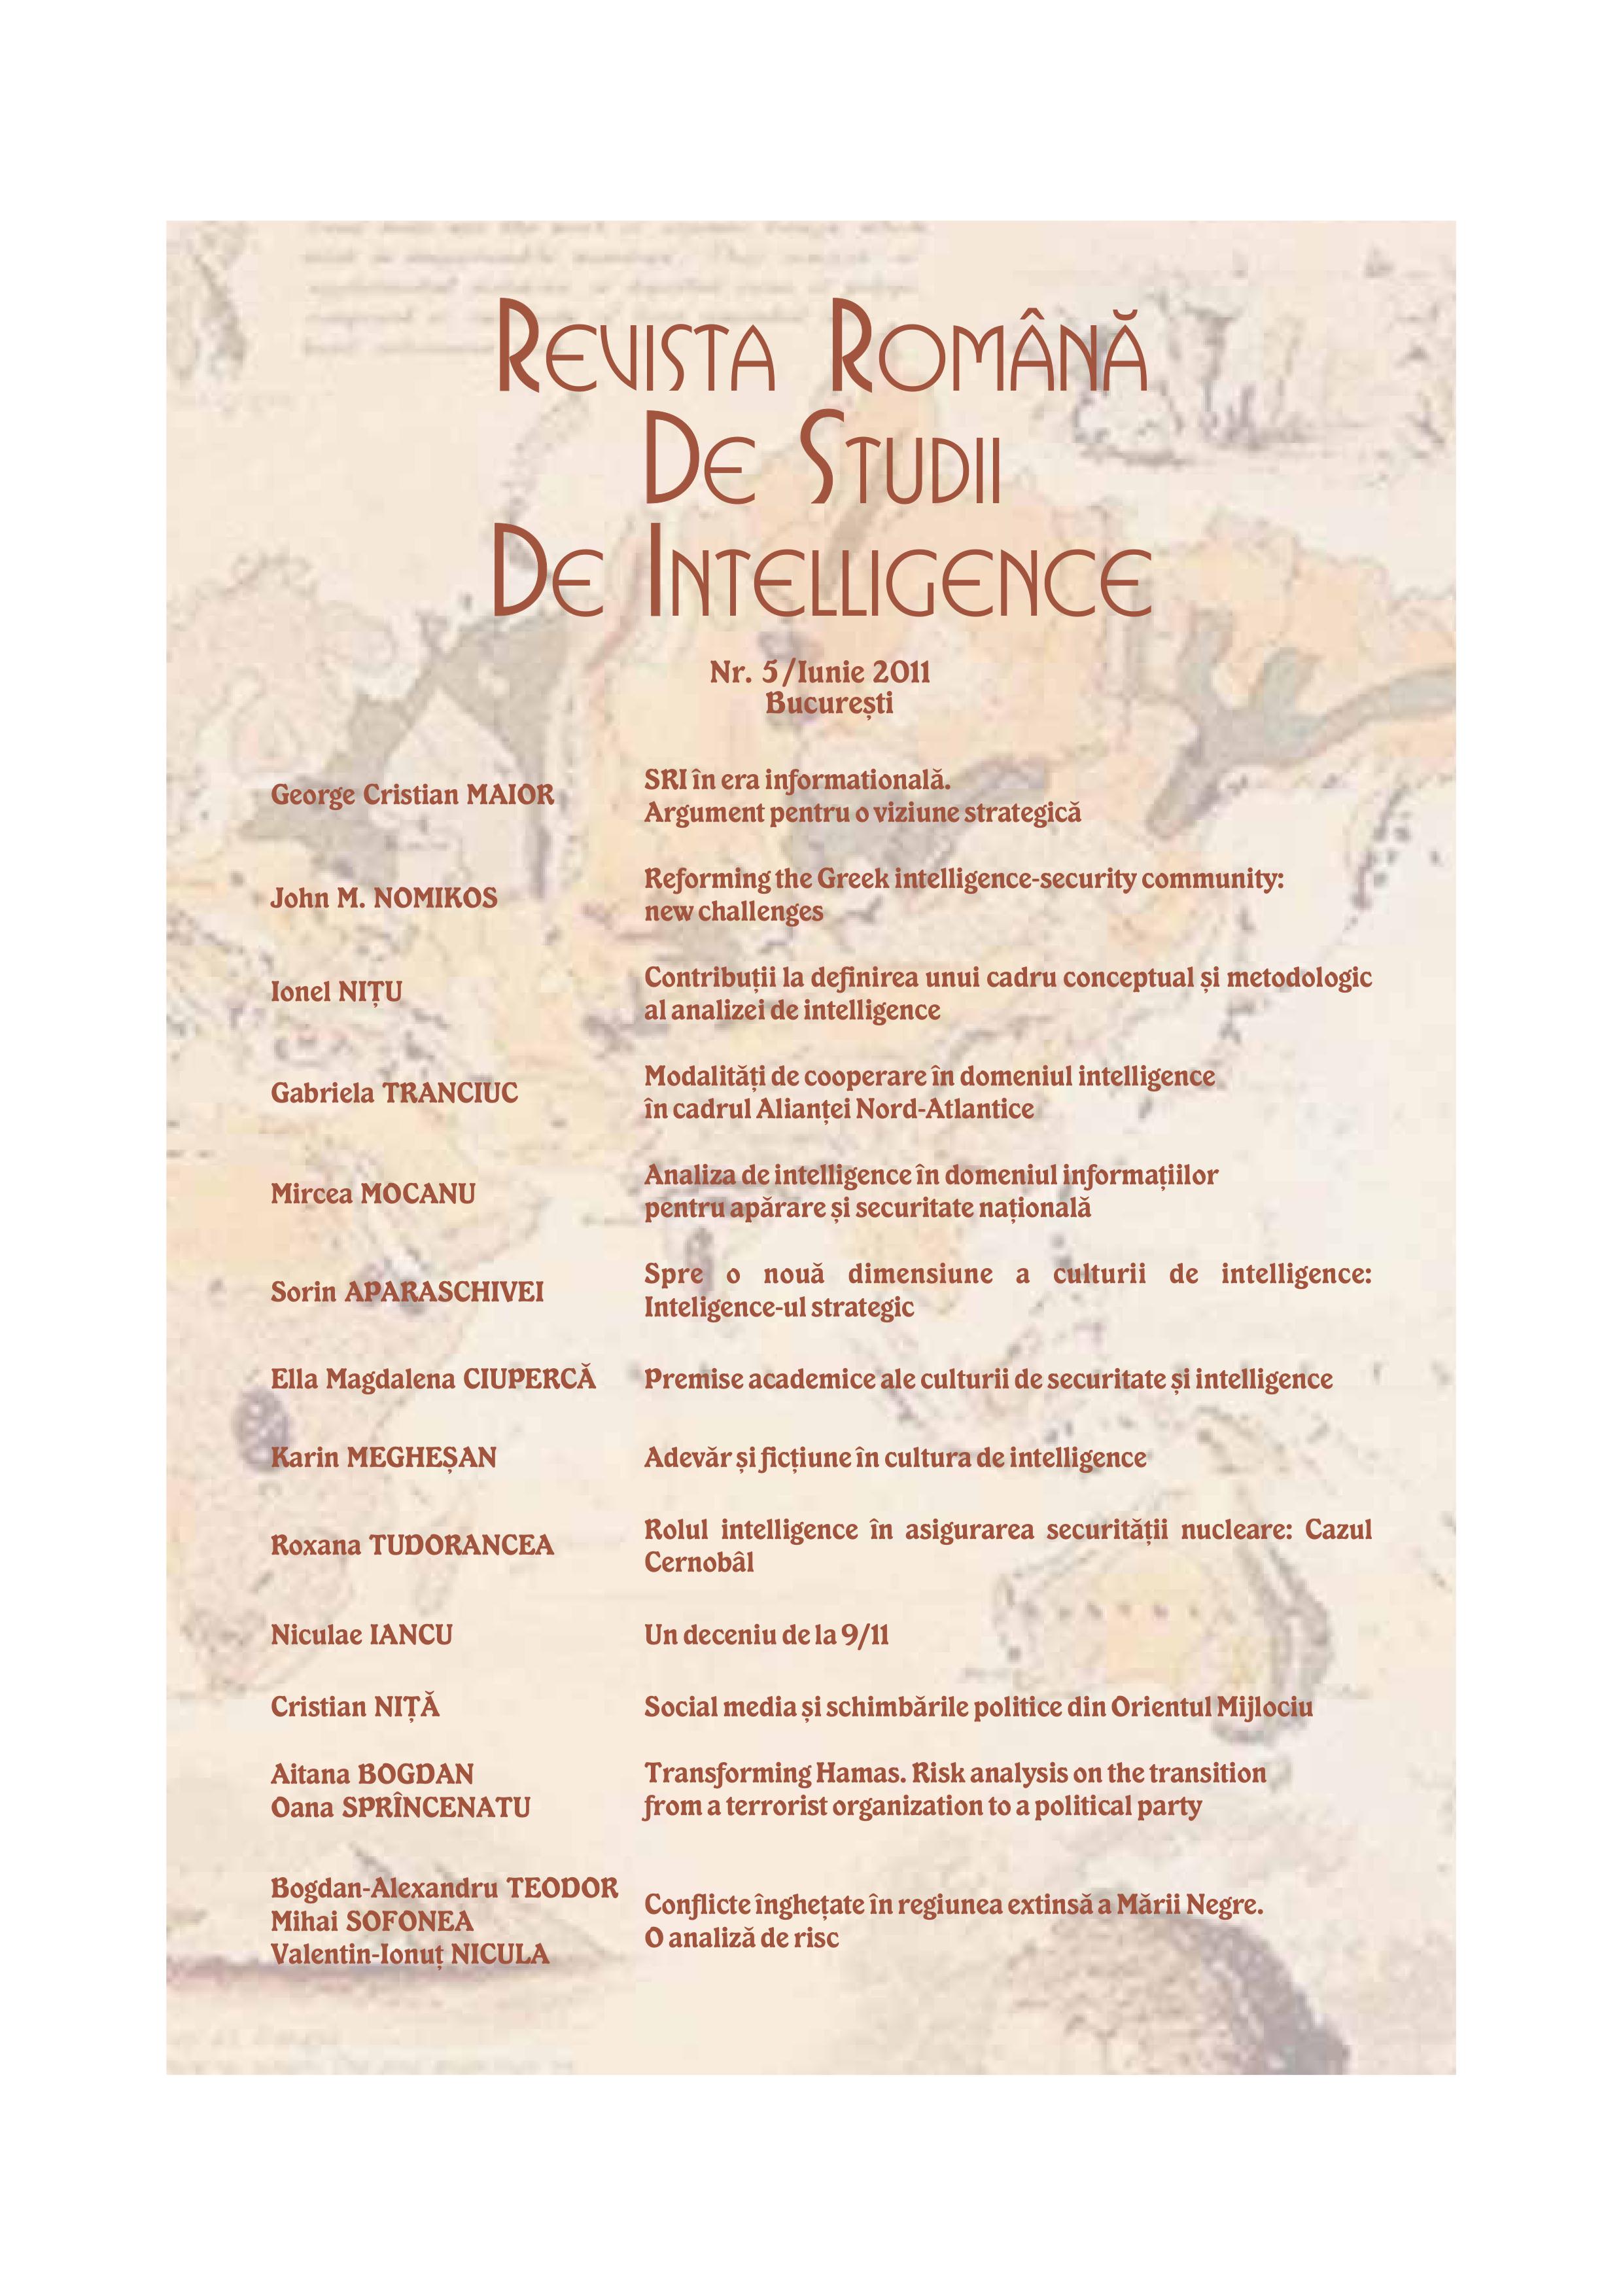 Towards a new dimension of intelligence culture: Strategic Intelligence Cover Image